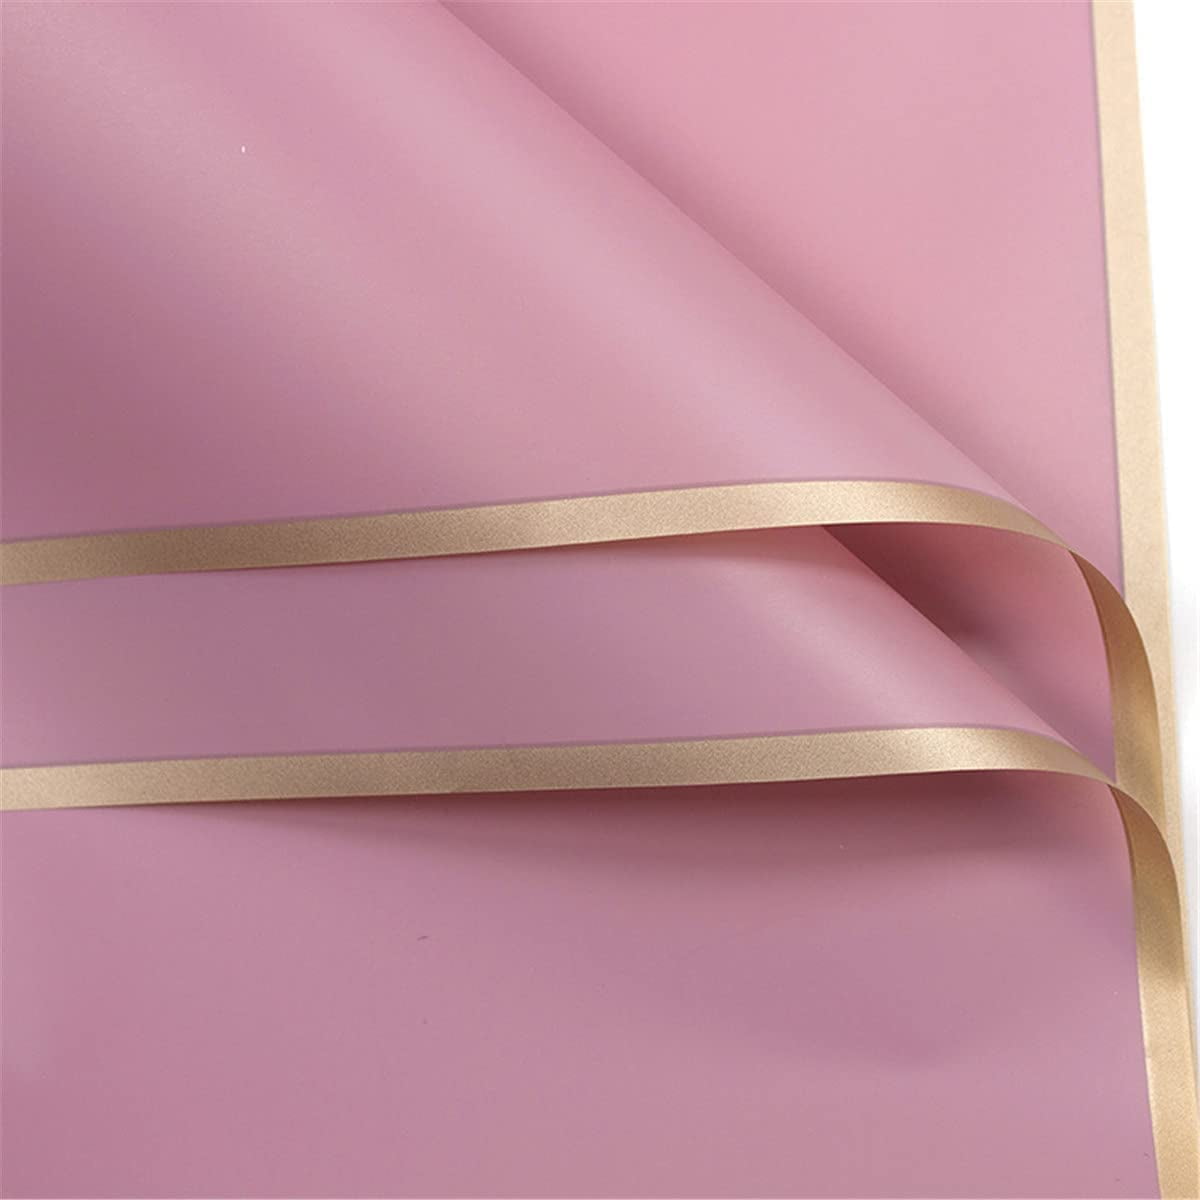 20 Sheets BBJ Wraps Waterproof Floral Wrapping Paper Sheets Fresh Flowers Bouquet Gift Packaging Korean Florist Supplies White 